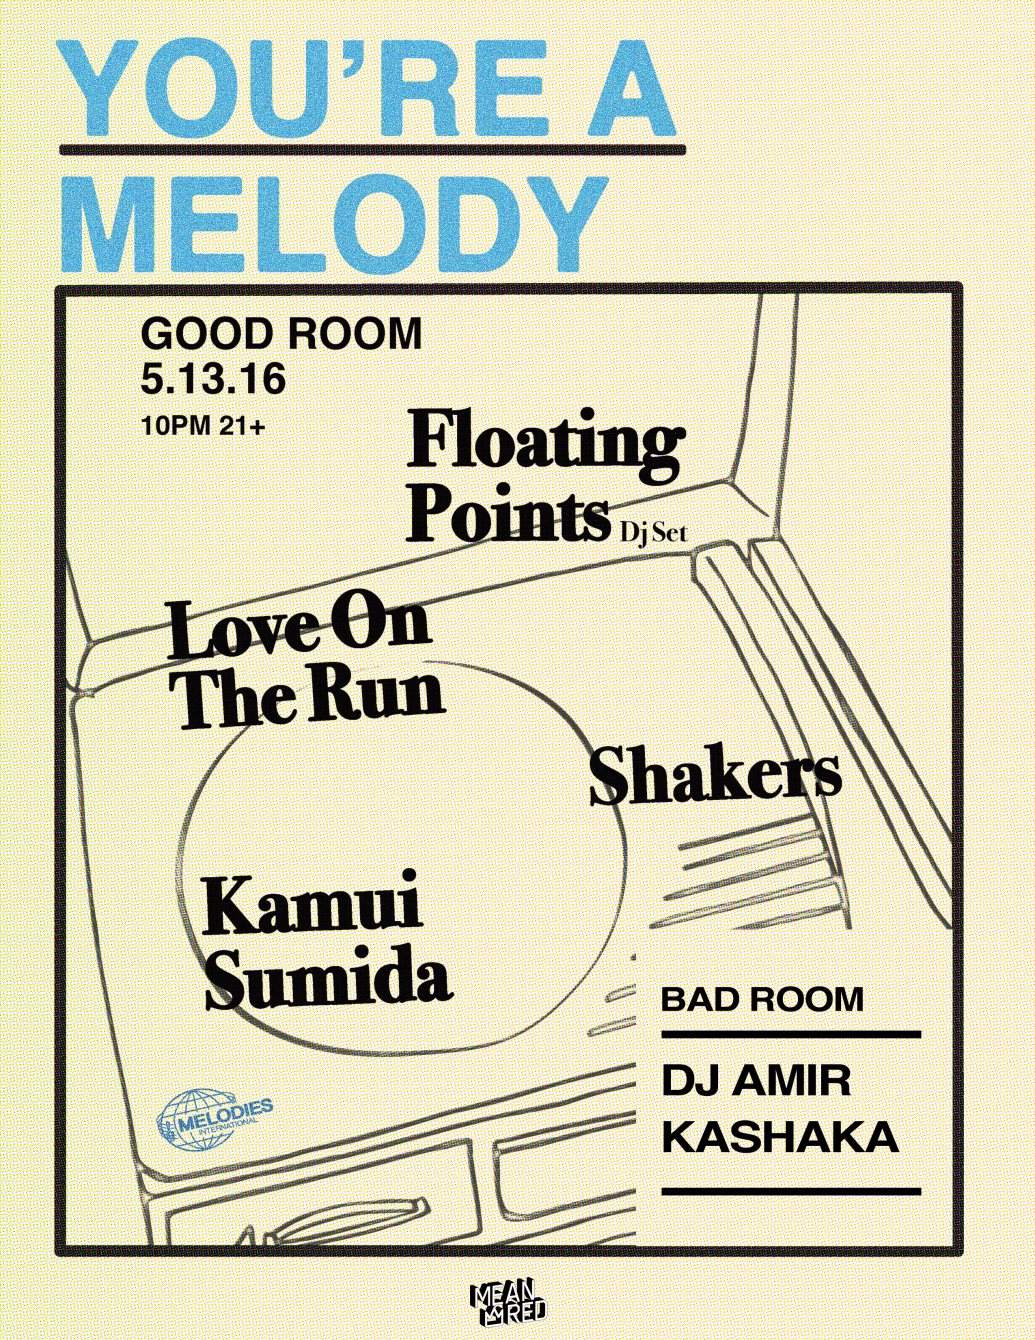 Floating Points (DJ Set), DJ Love On The Run, Shakers, Kamui Sumido || You're A Melody - フライヤー表